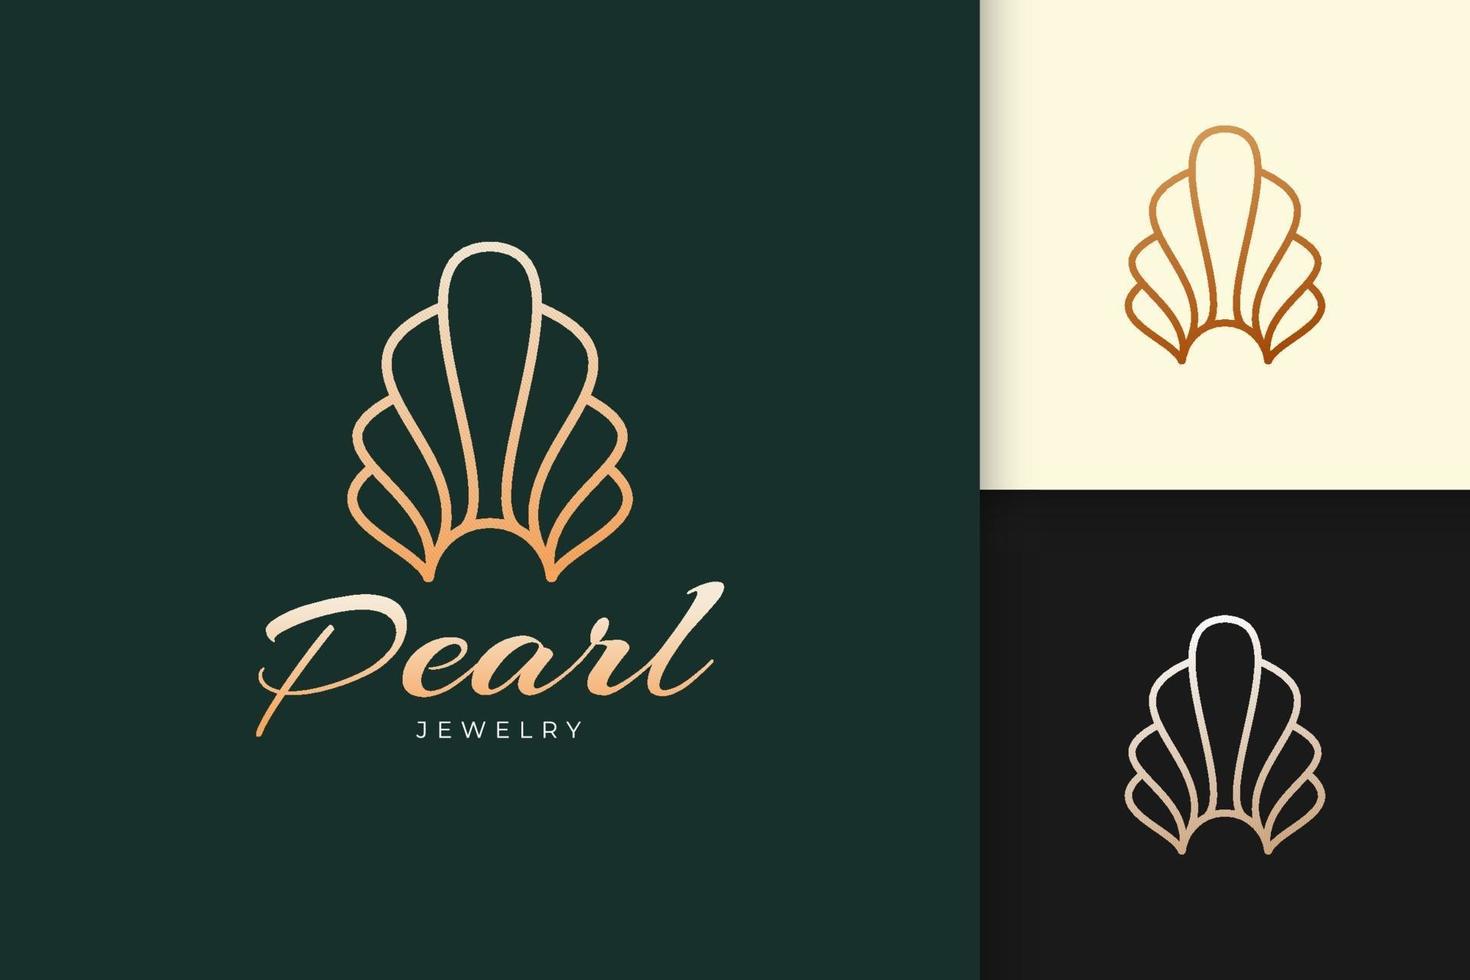 Pearl or jewelry logo in luxury and classy from shell or clam shape vector